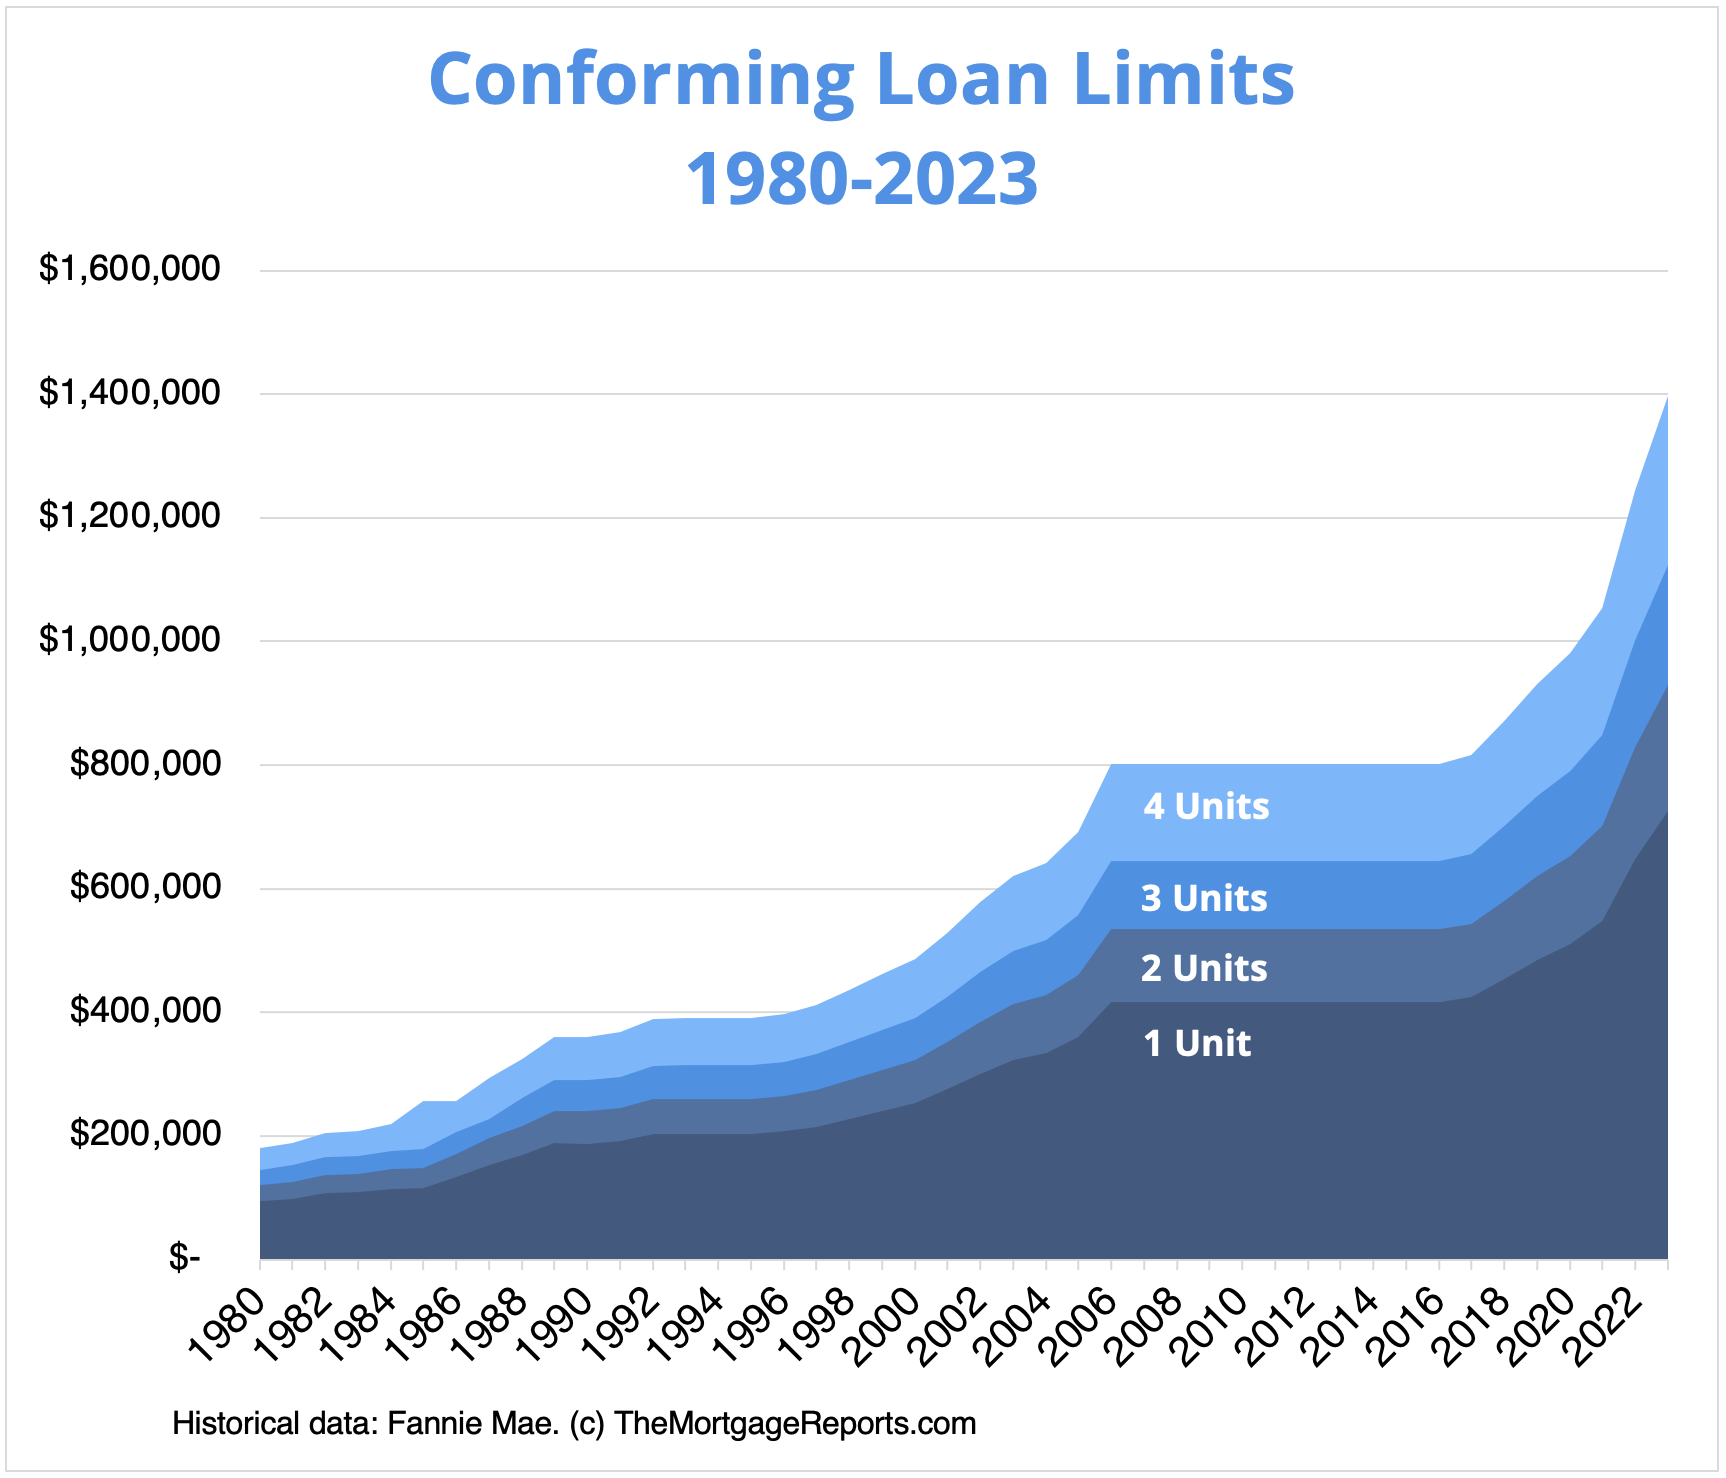 Chart showing conforming loan limits from 1980 to 2023. The single family limit increased to over $700,000 in 2023